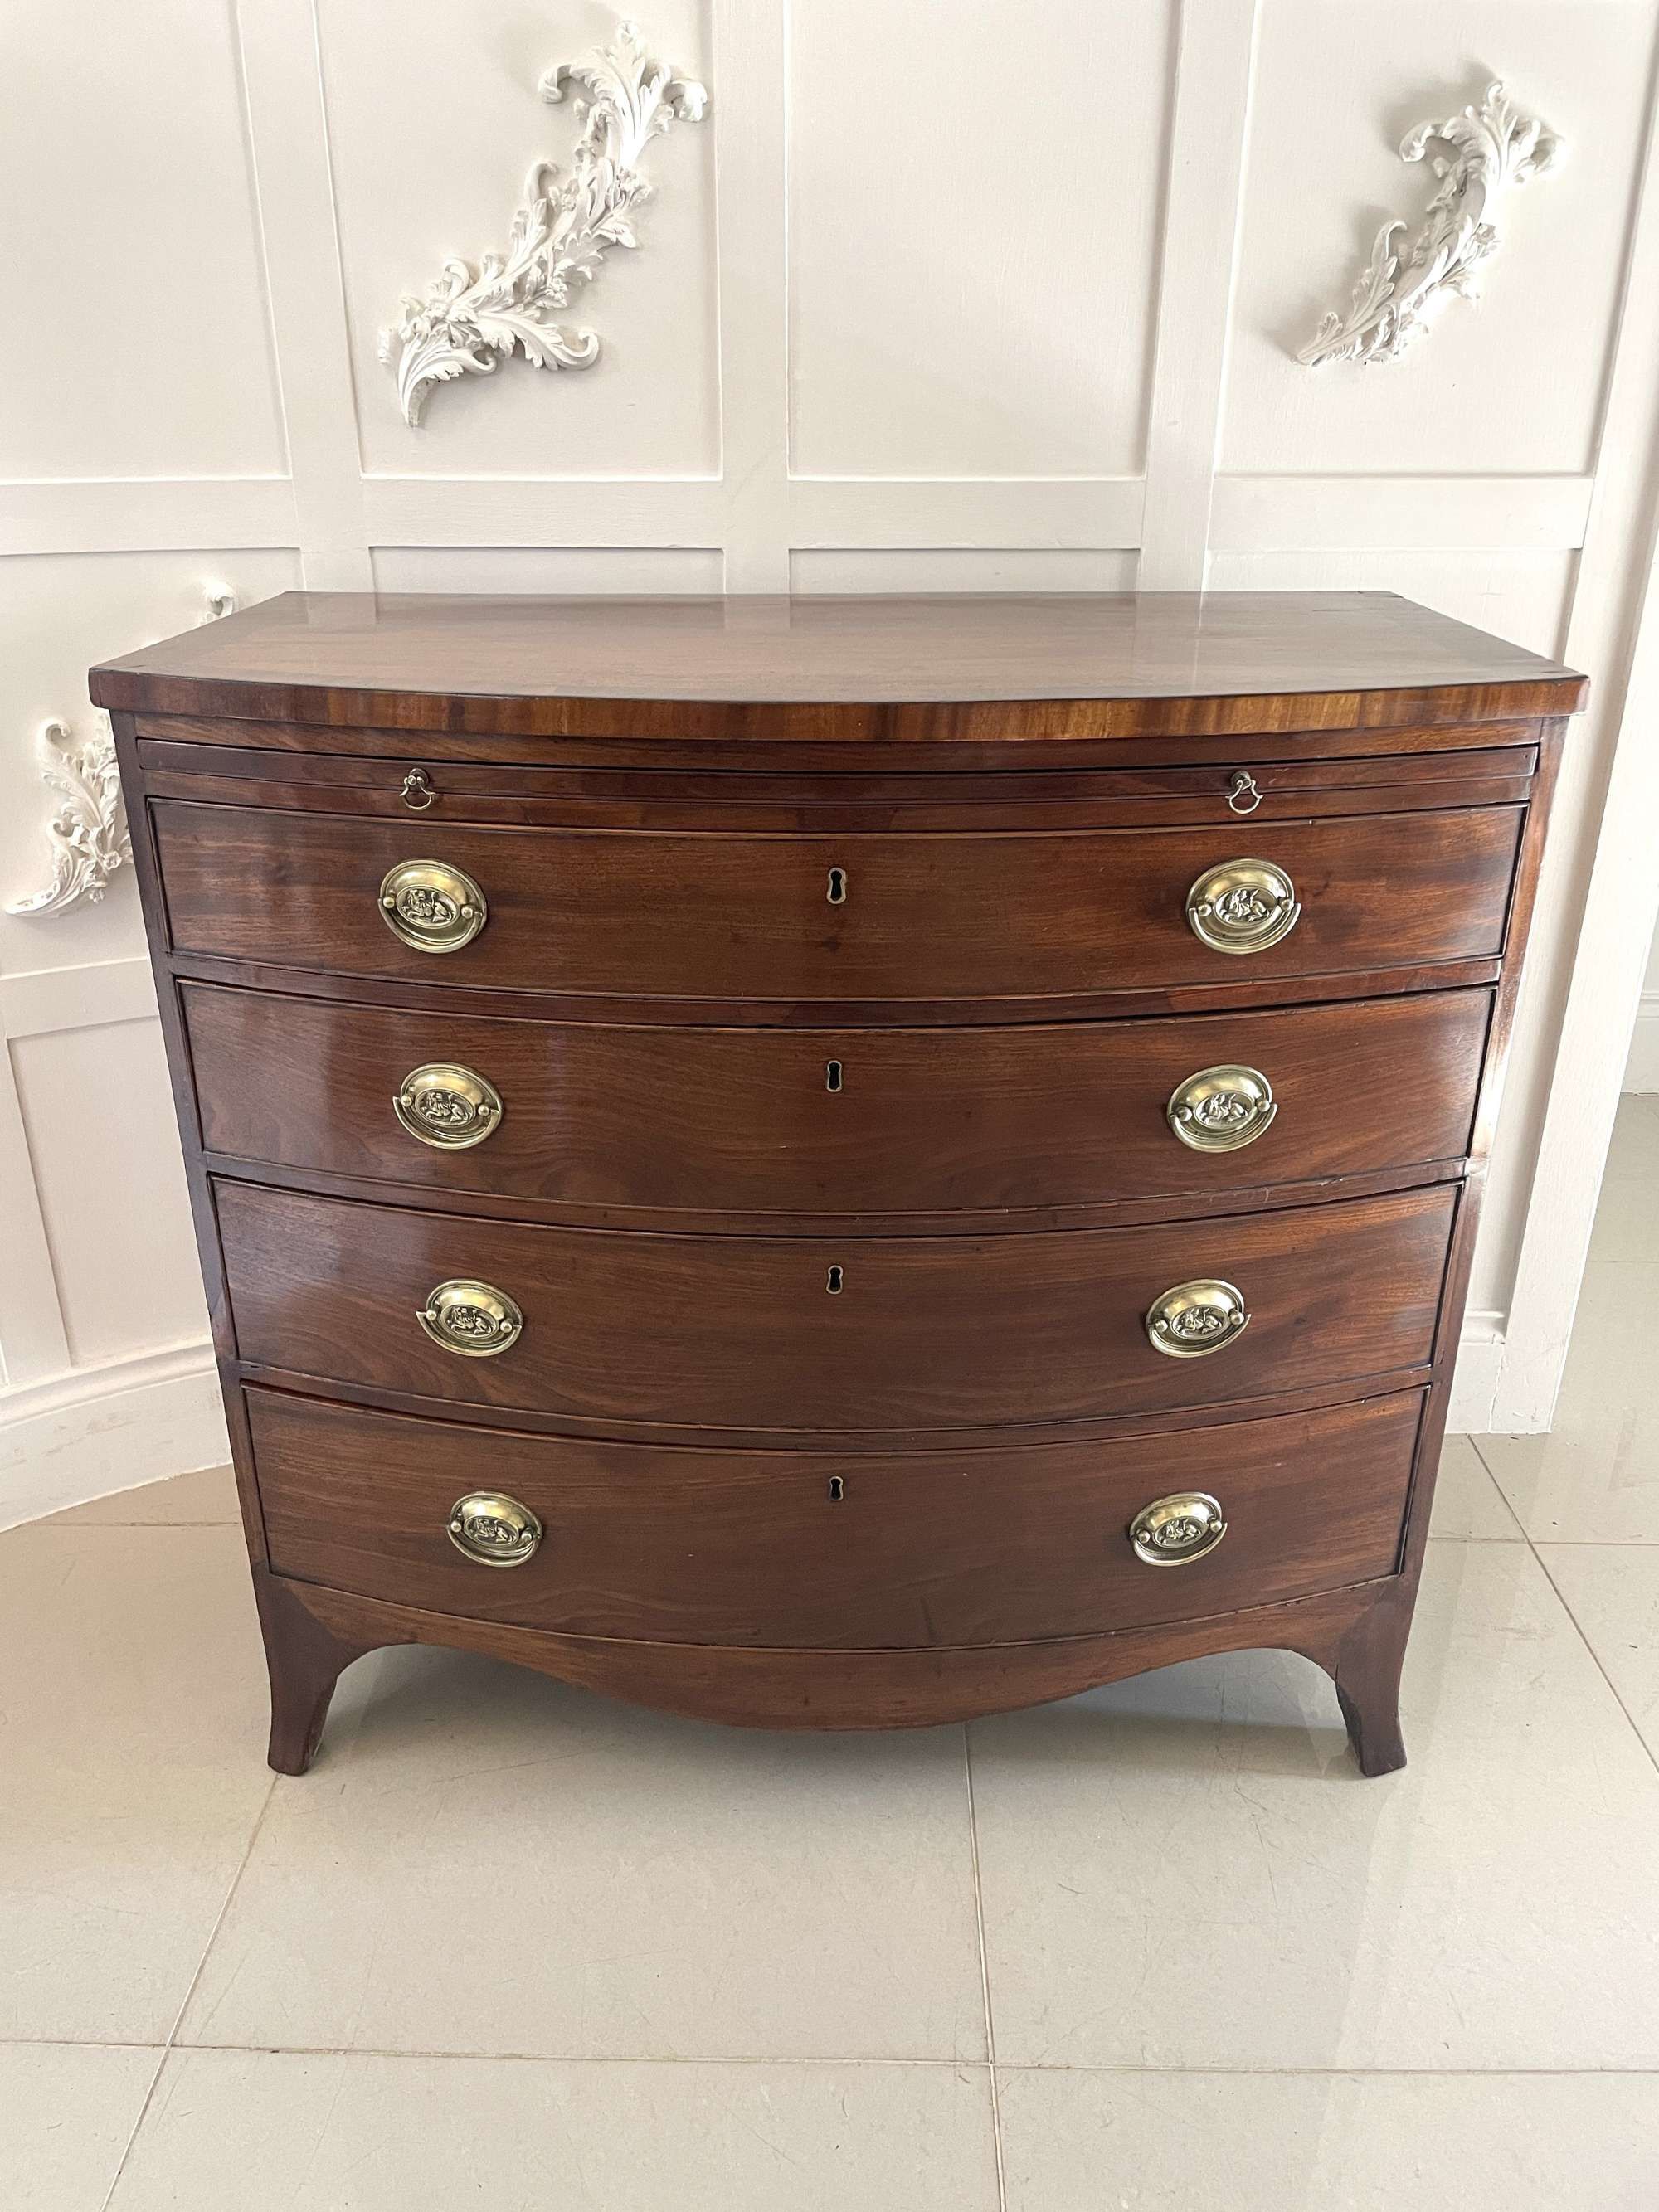 Outstanding Quality Antique George Iii Figured Mahogany Bow Fronted Chest Of Drawers